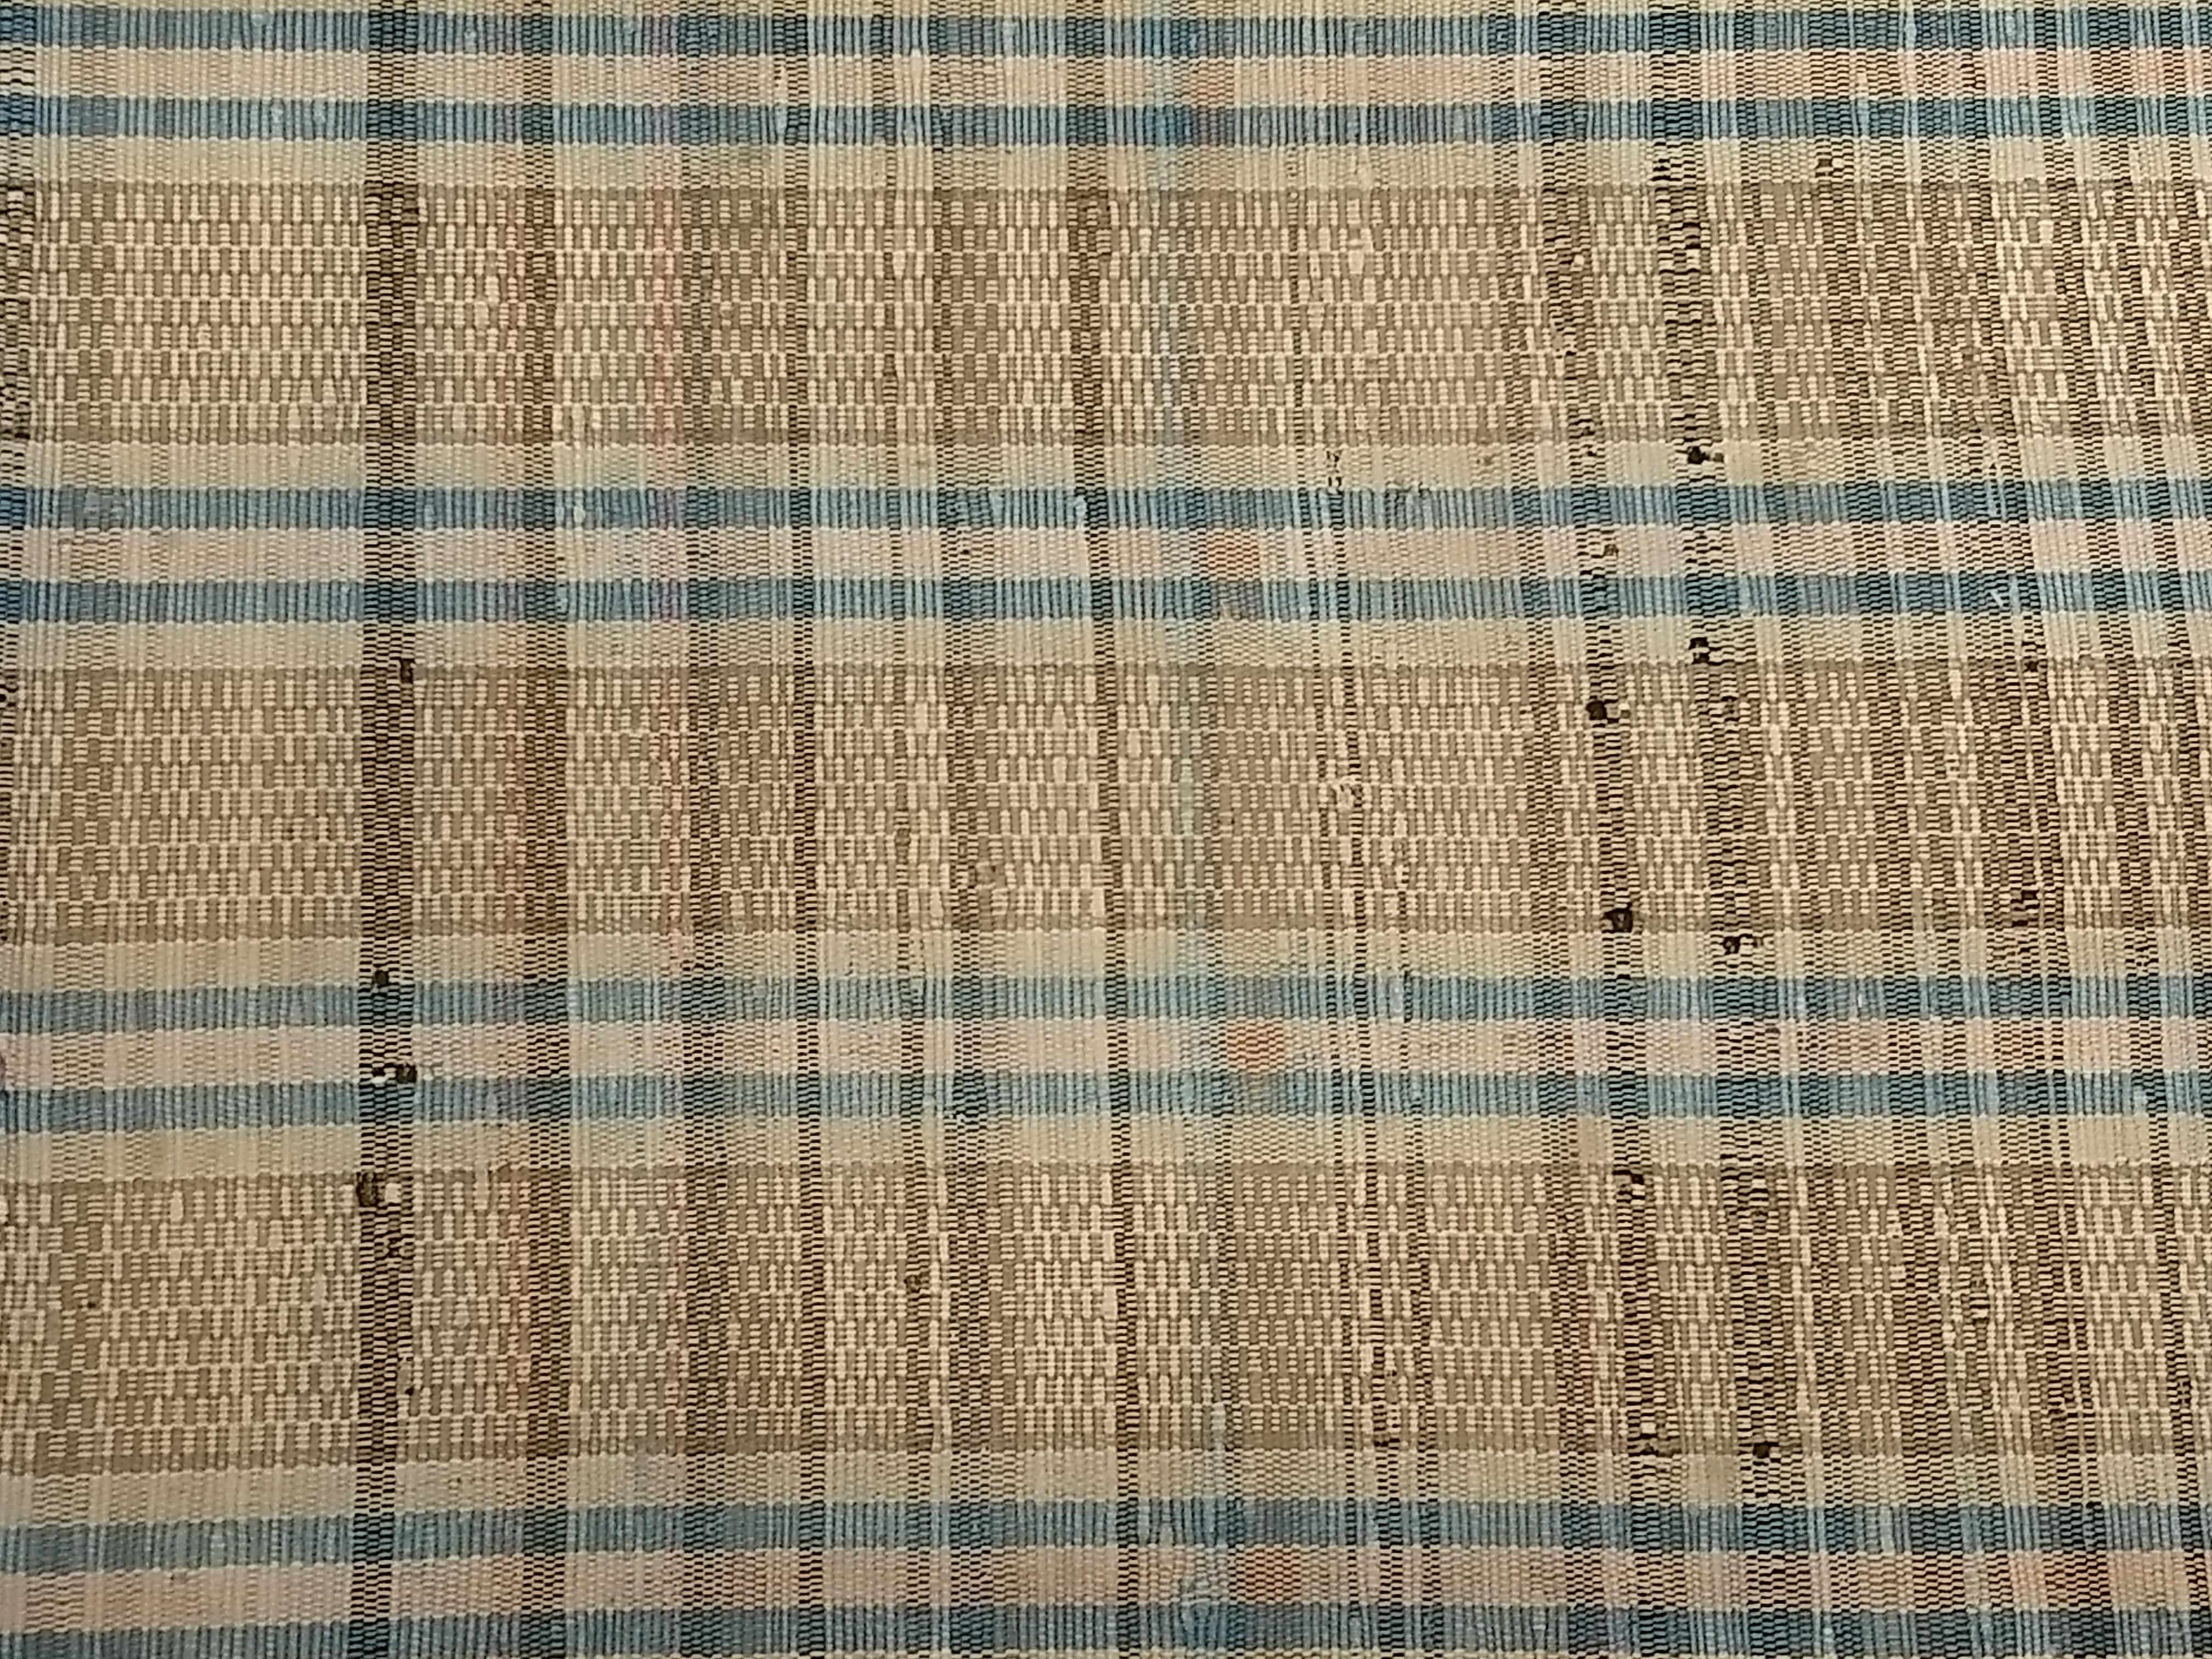 Vintage Hand-Woven American Amish Rag Runner in Pale Blue, Pink, Wheat, Caramel For Sale 6